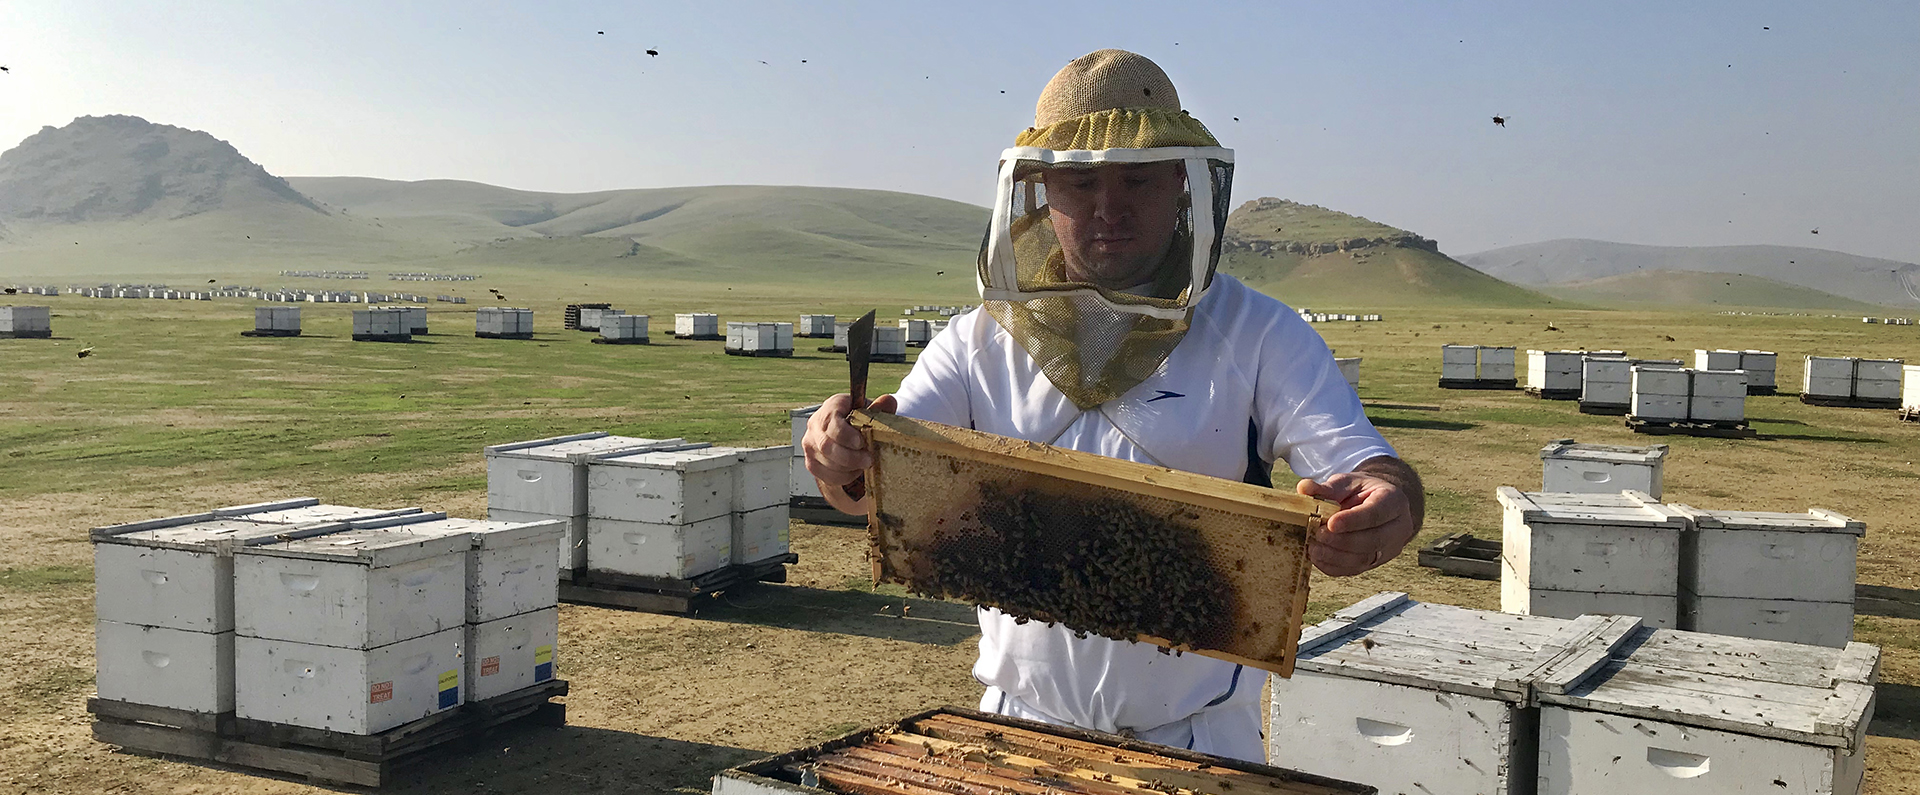 ARS researcher inspecting bee colonies in a holding yard in California. 